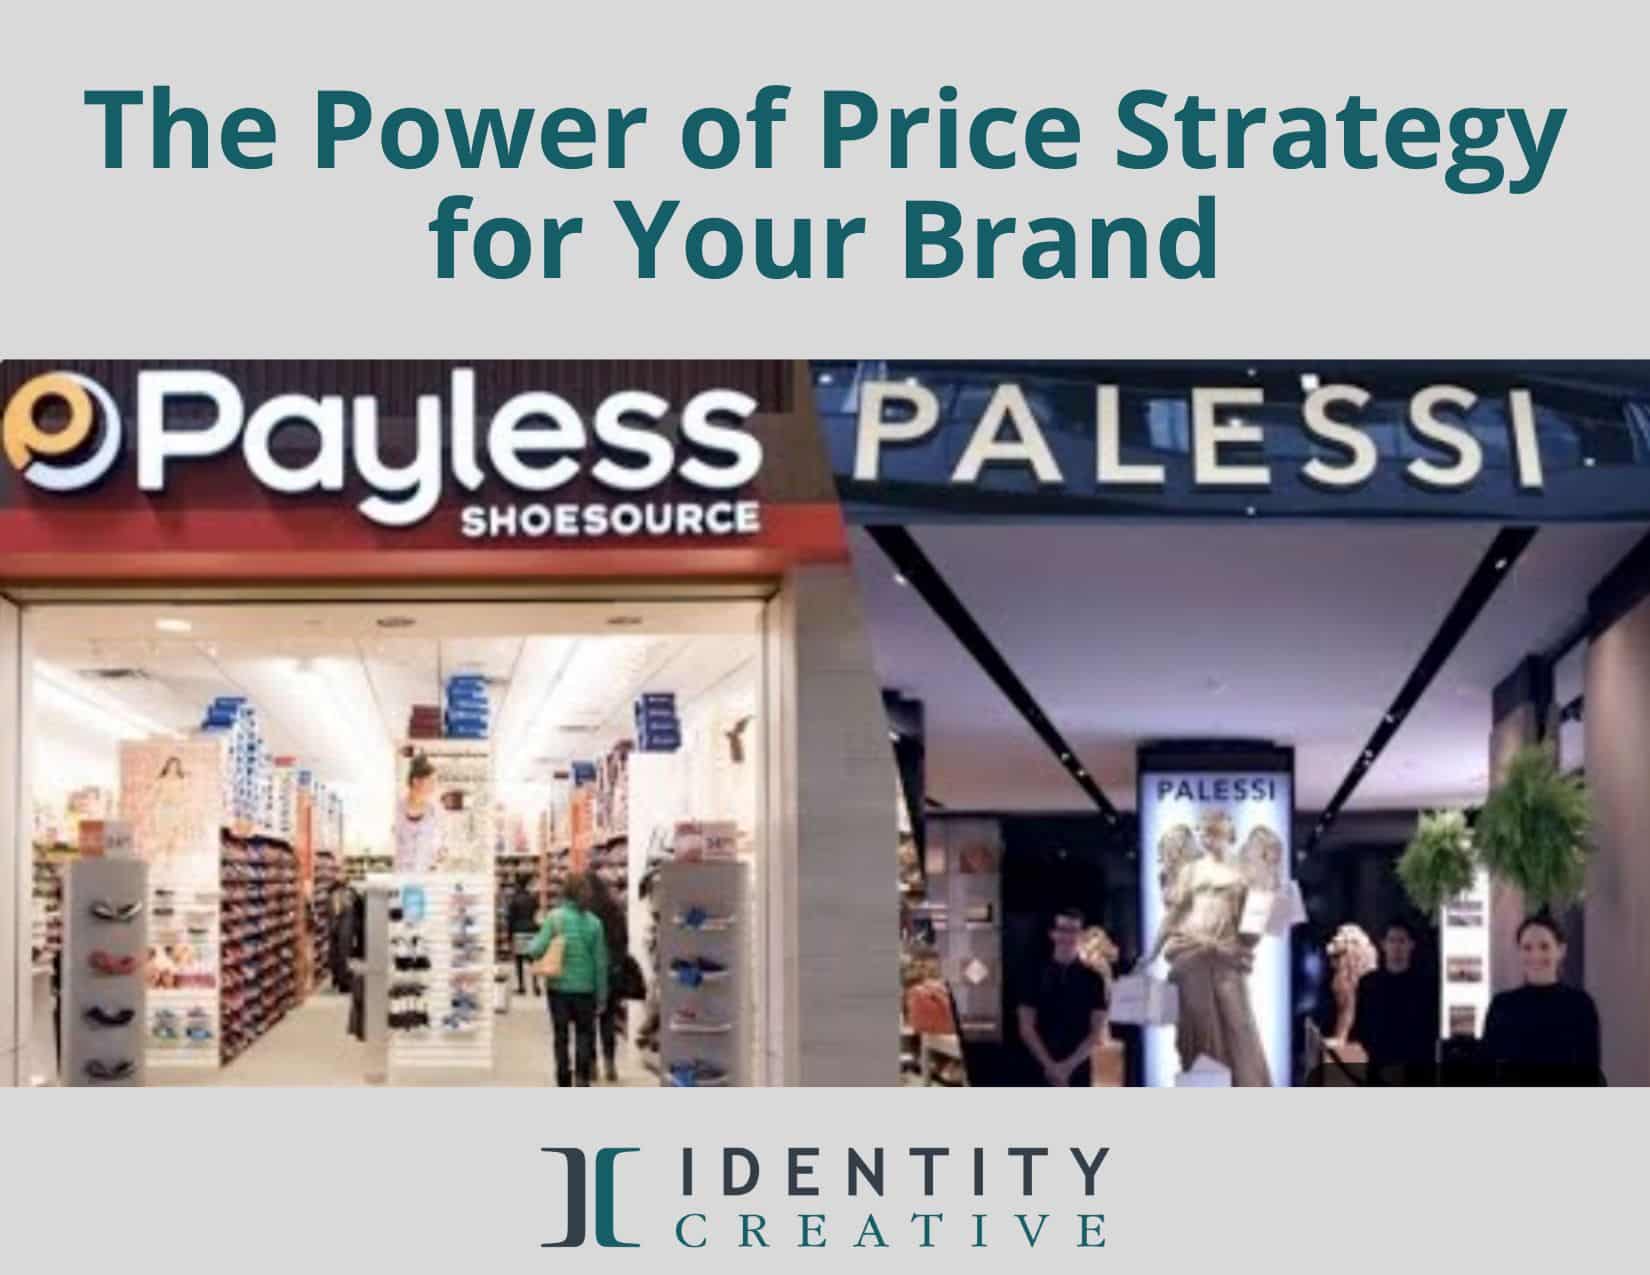 The Power of Branding on Your Price Strategy